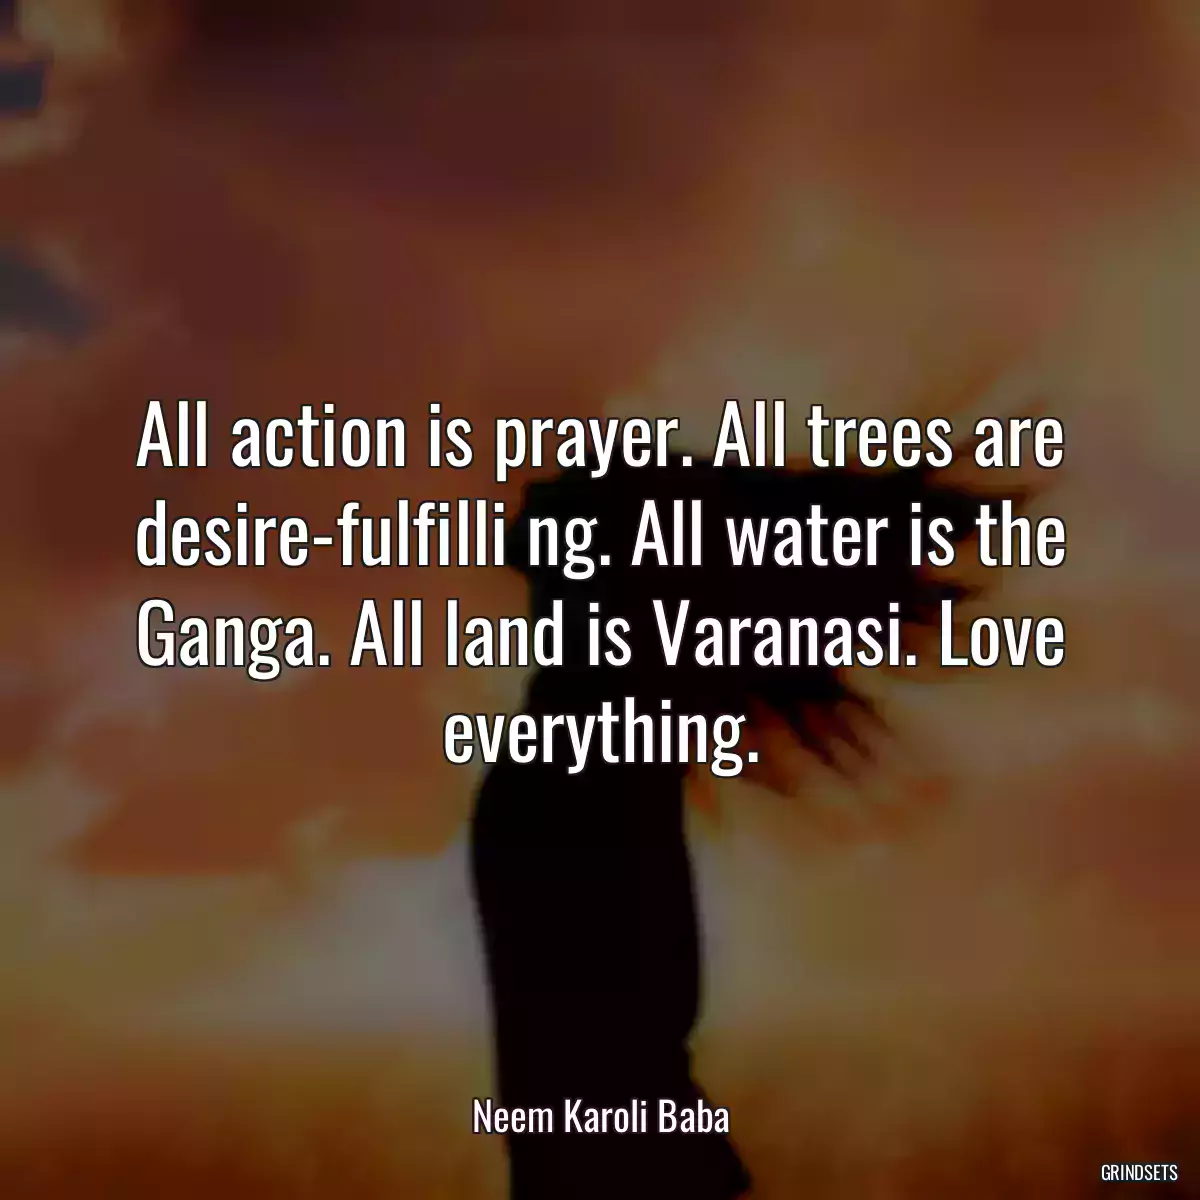 All action is prayer. All trees are desire-fulfilli ng. All water is the Ganga. All land is Varanasi. Love everything.